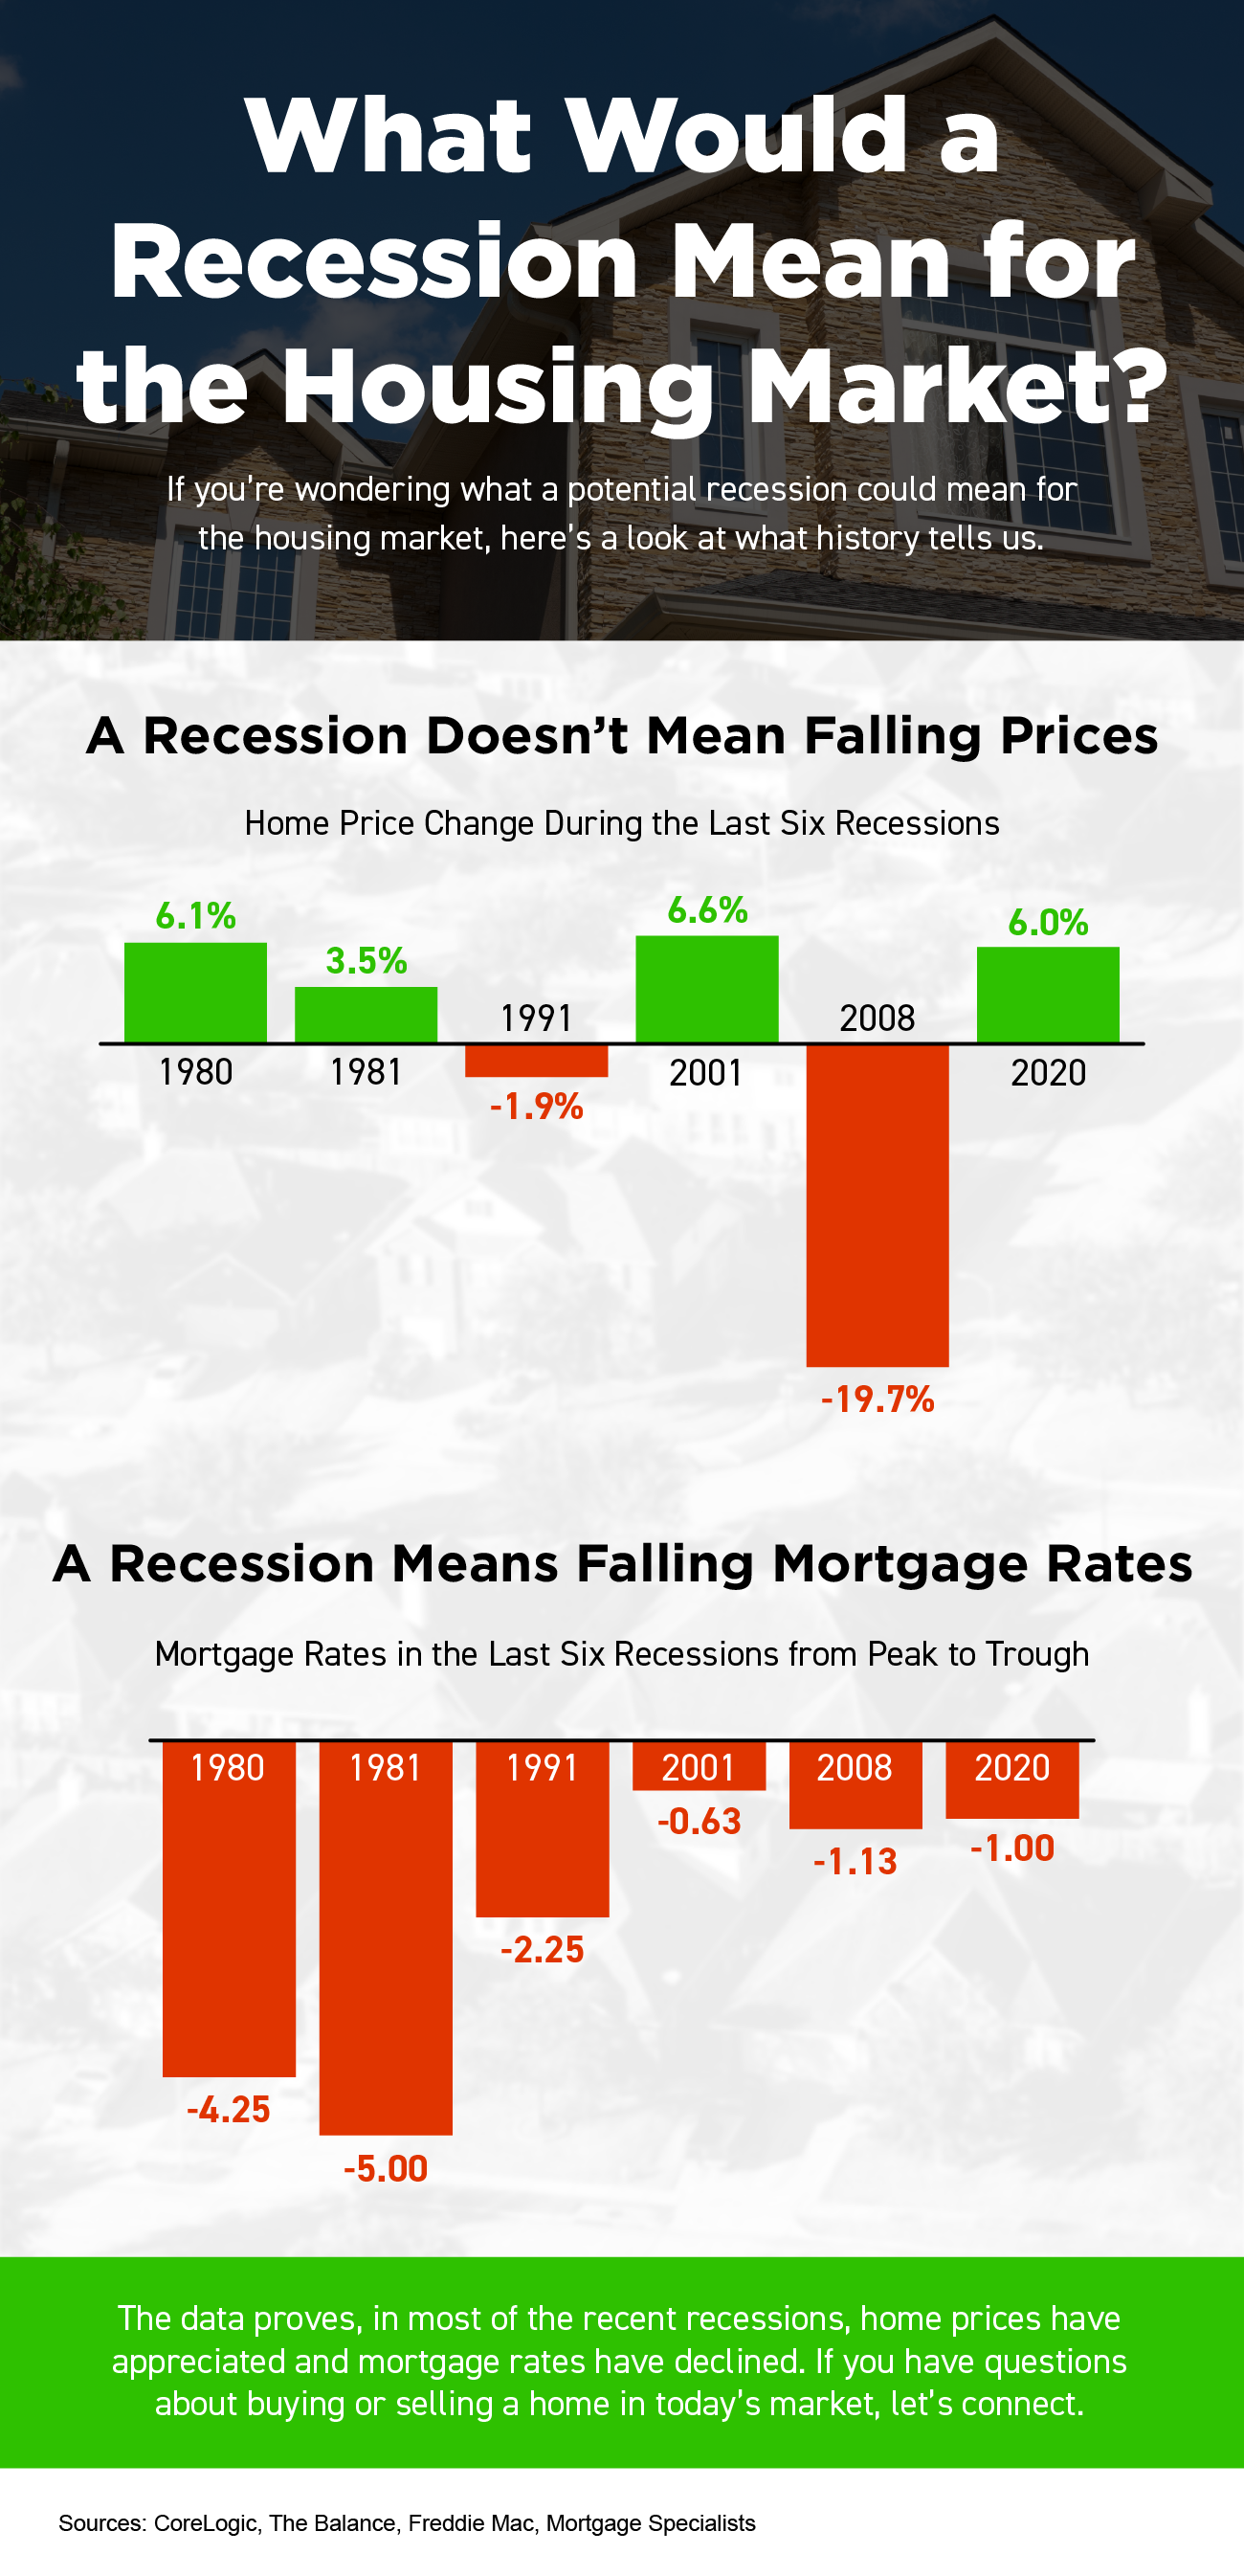  20220826-MEM What Would a Recession Mean for the Housing Market? [INFOGRAPHIC]  